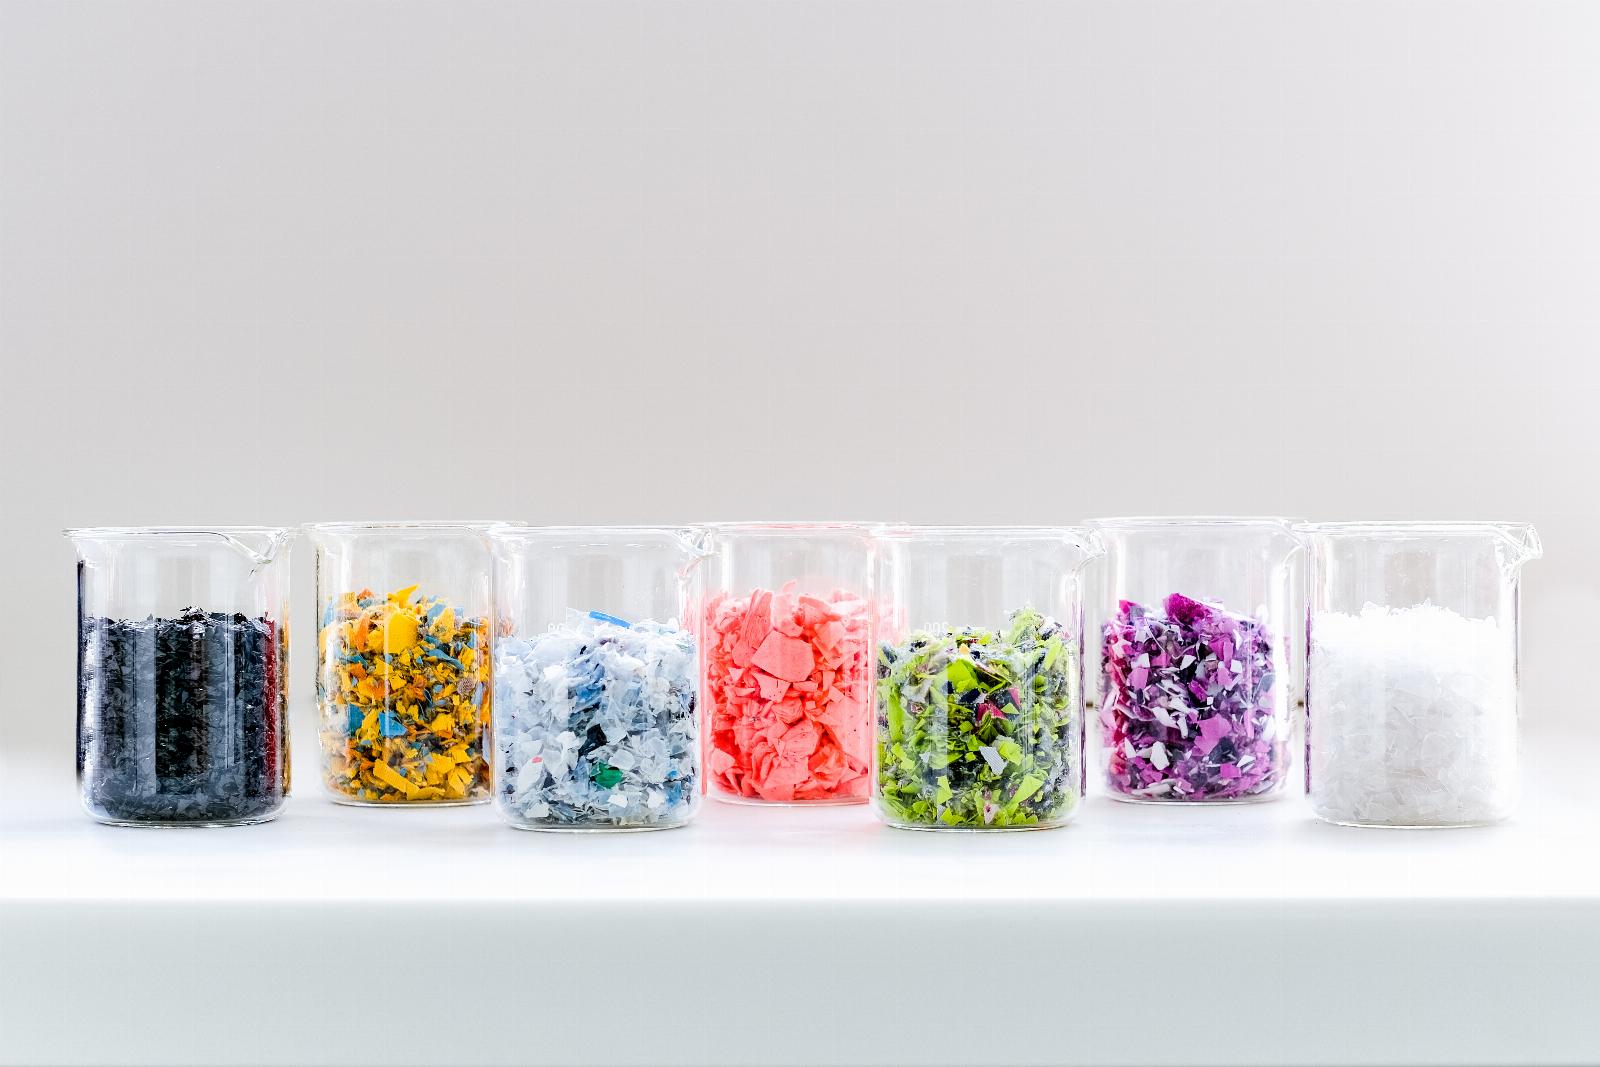 DePoly keeps hard to recycle plastic from ending up in landfills